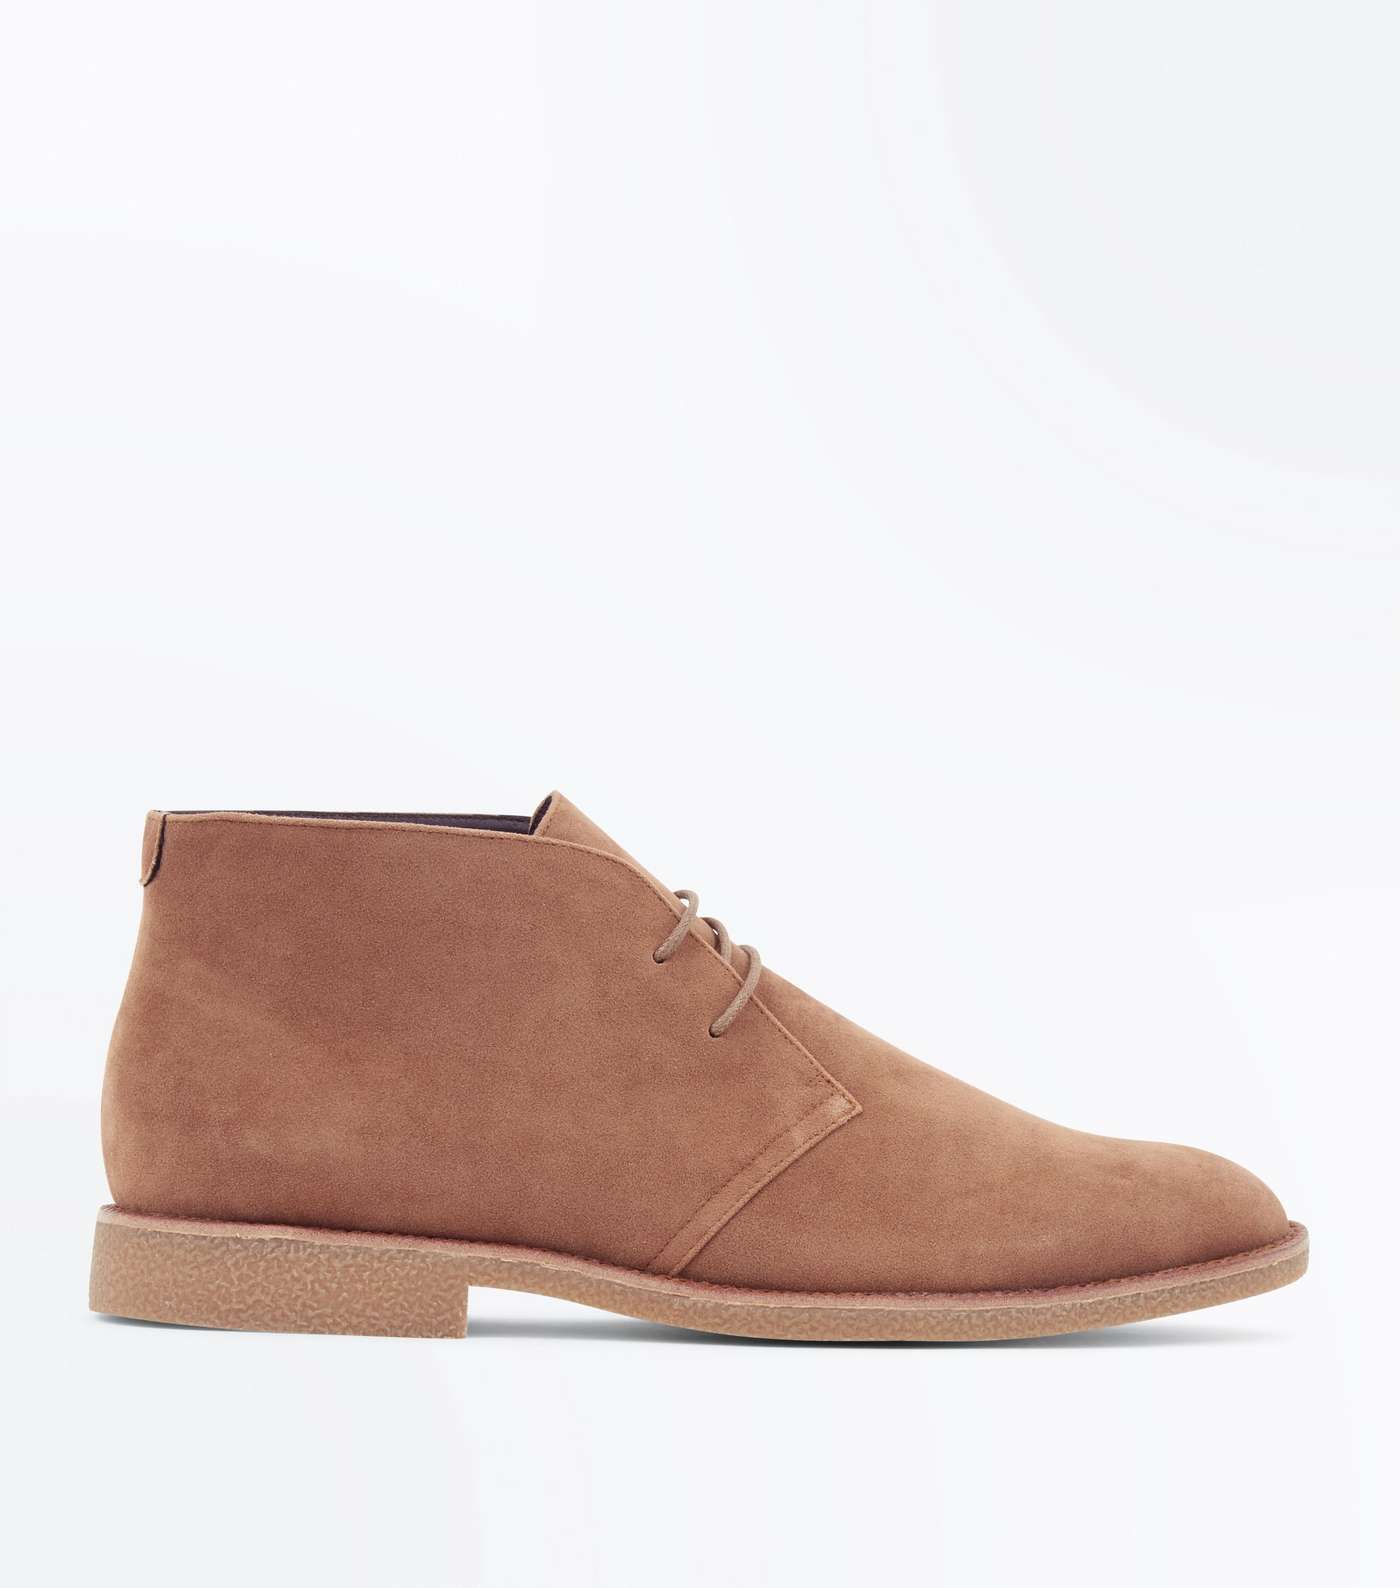 Stone Faux Suede Desert Boots